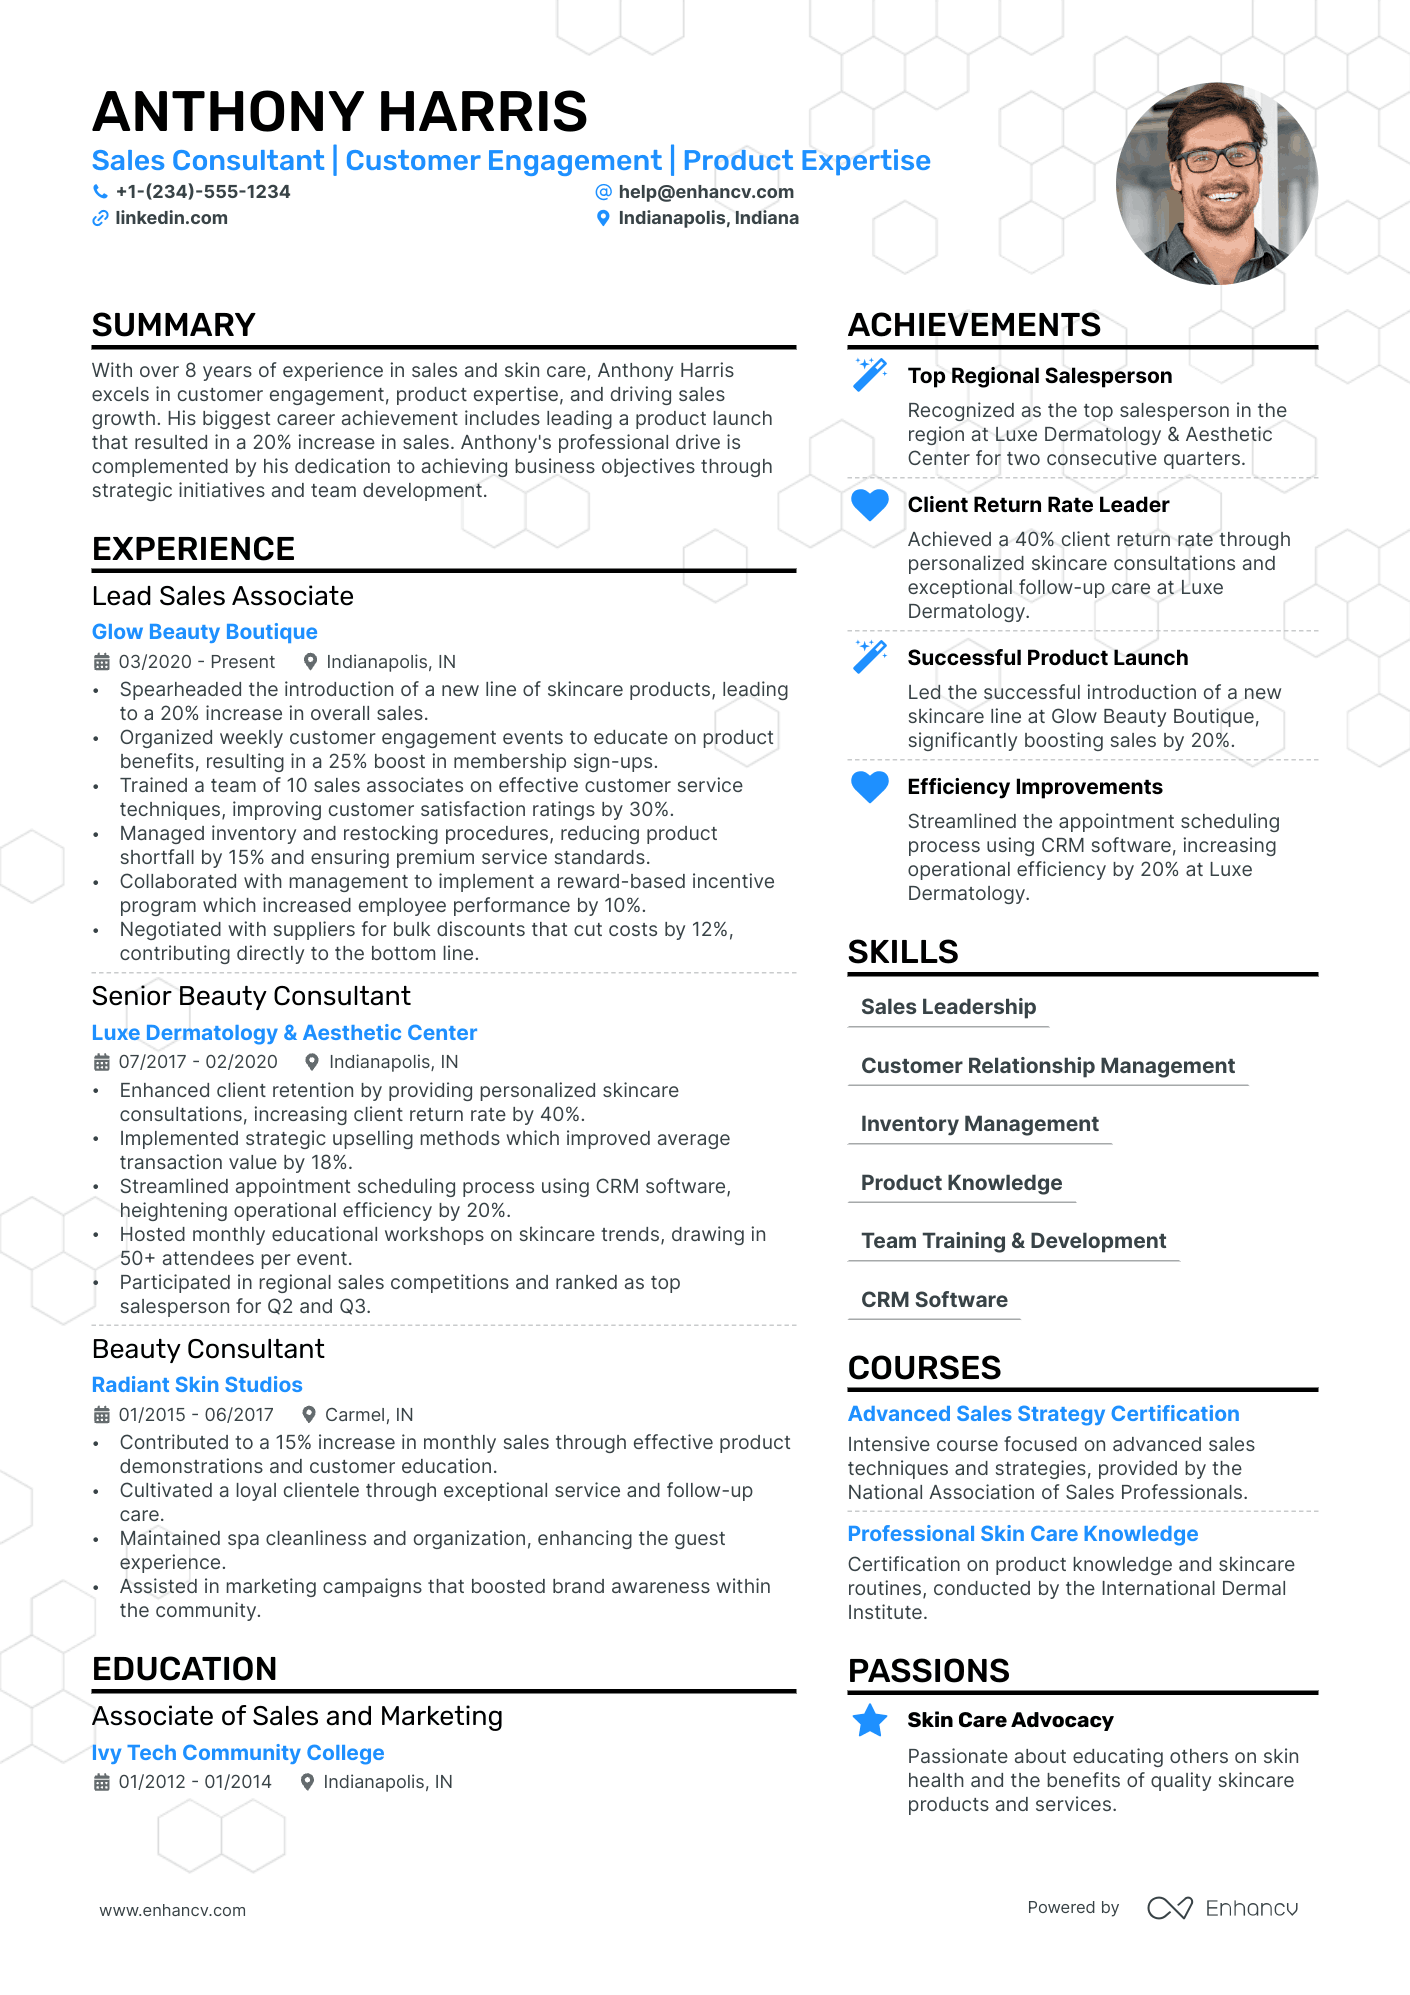 Beauty Consultant resume example